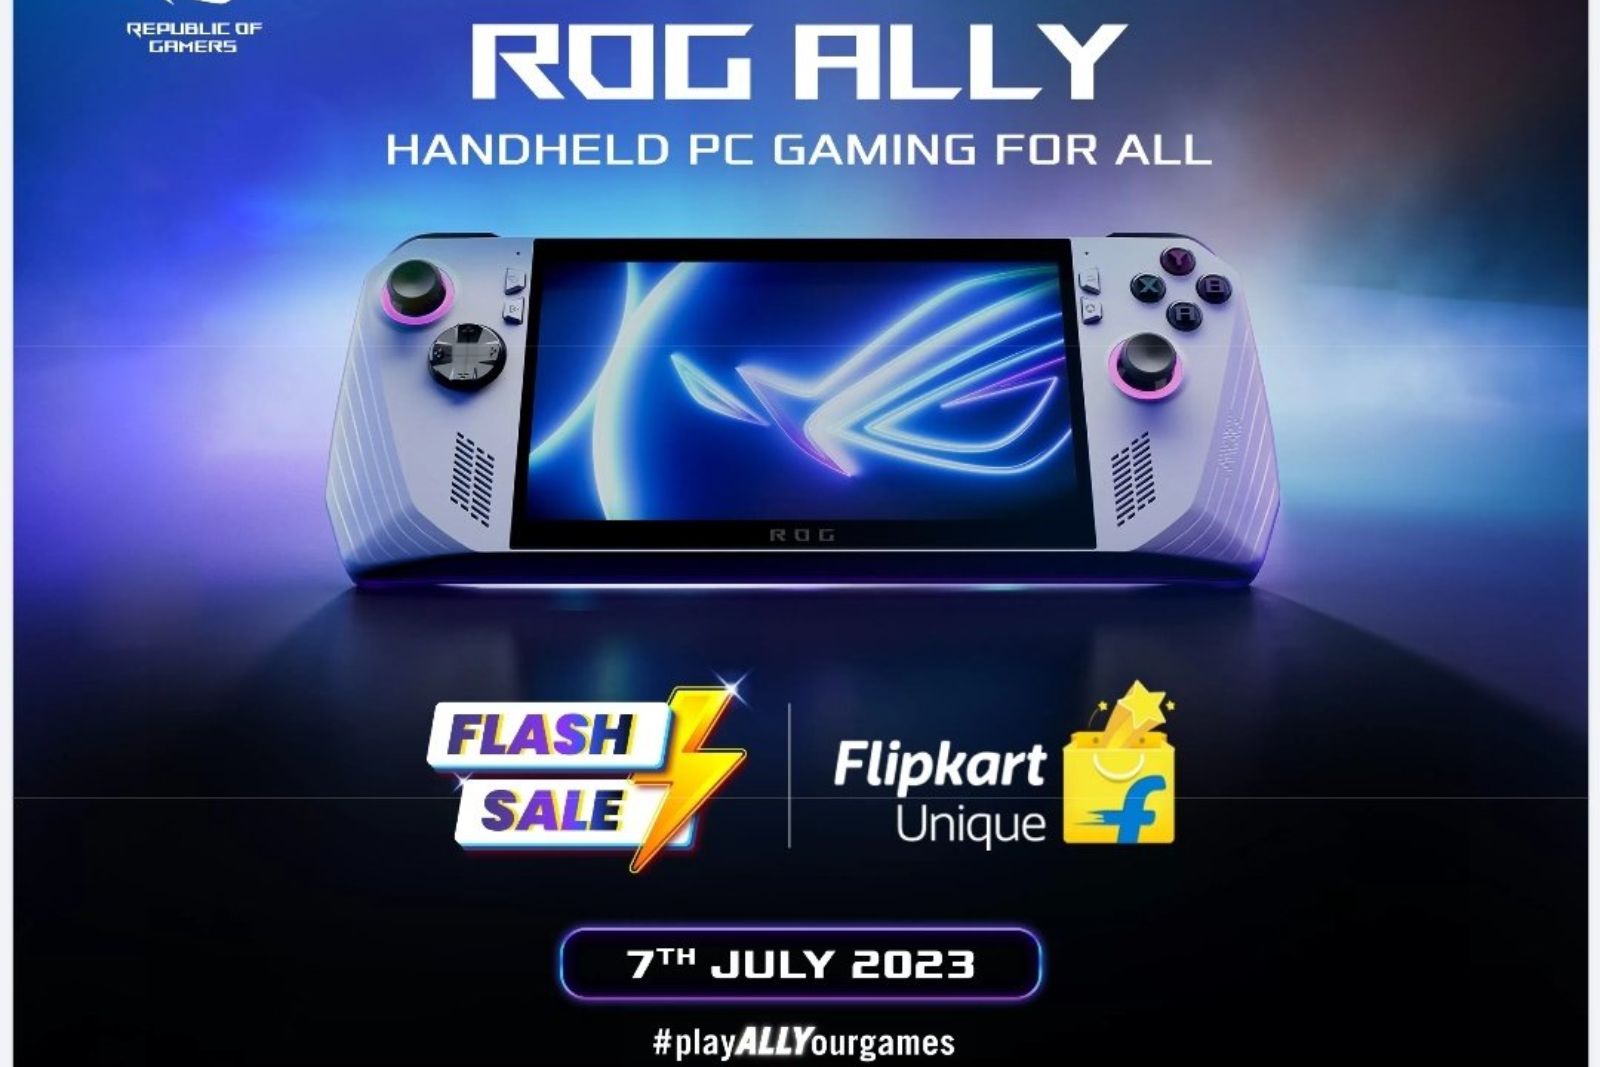 Asus ROG Ally is set to launch on July 7 India